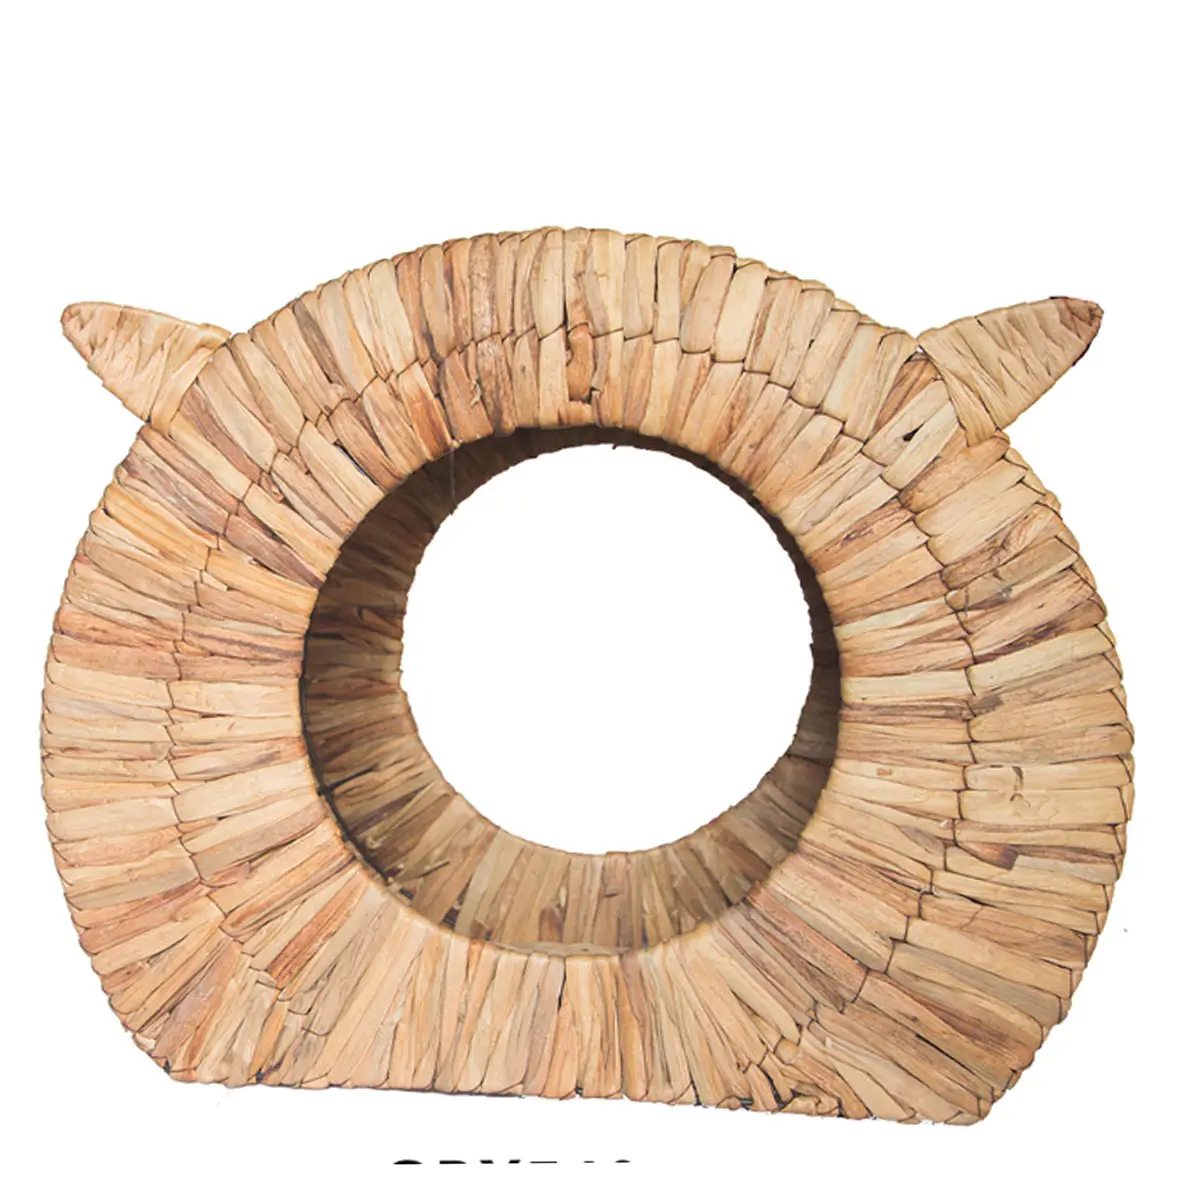 New cat Ears Natural water hyacinth round pet furniture Cat house con cuscino spesso